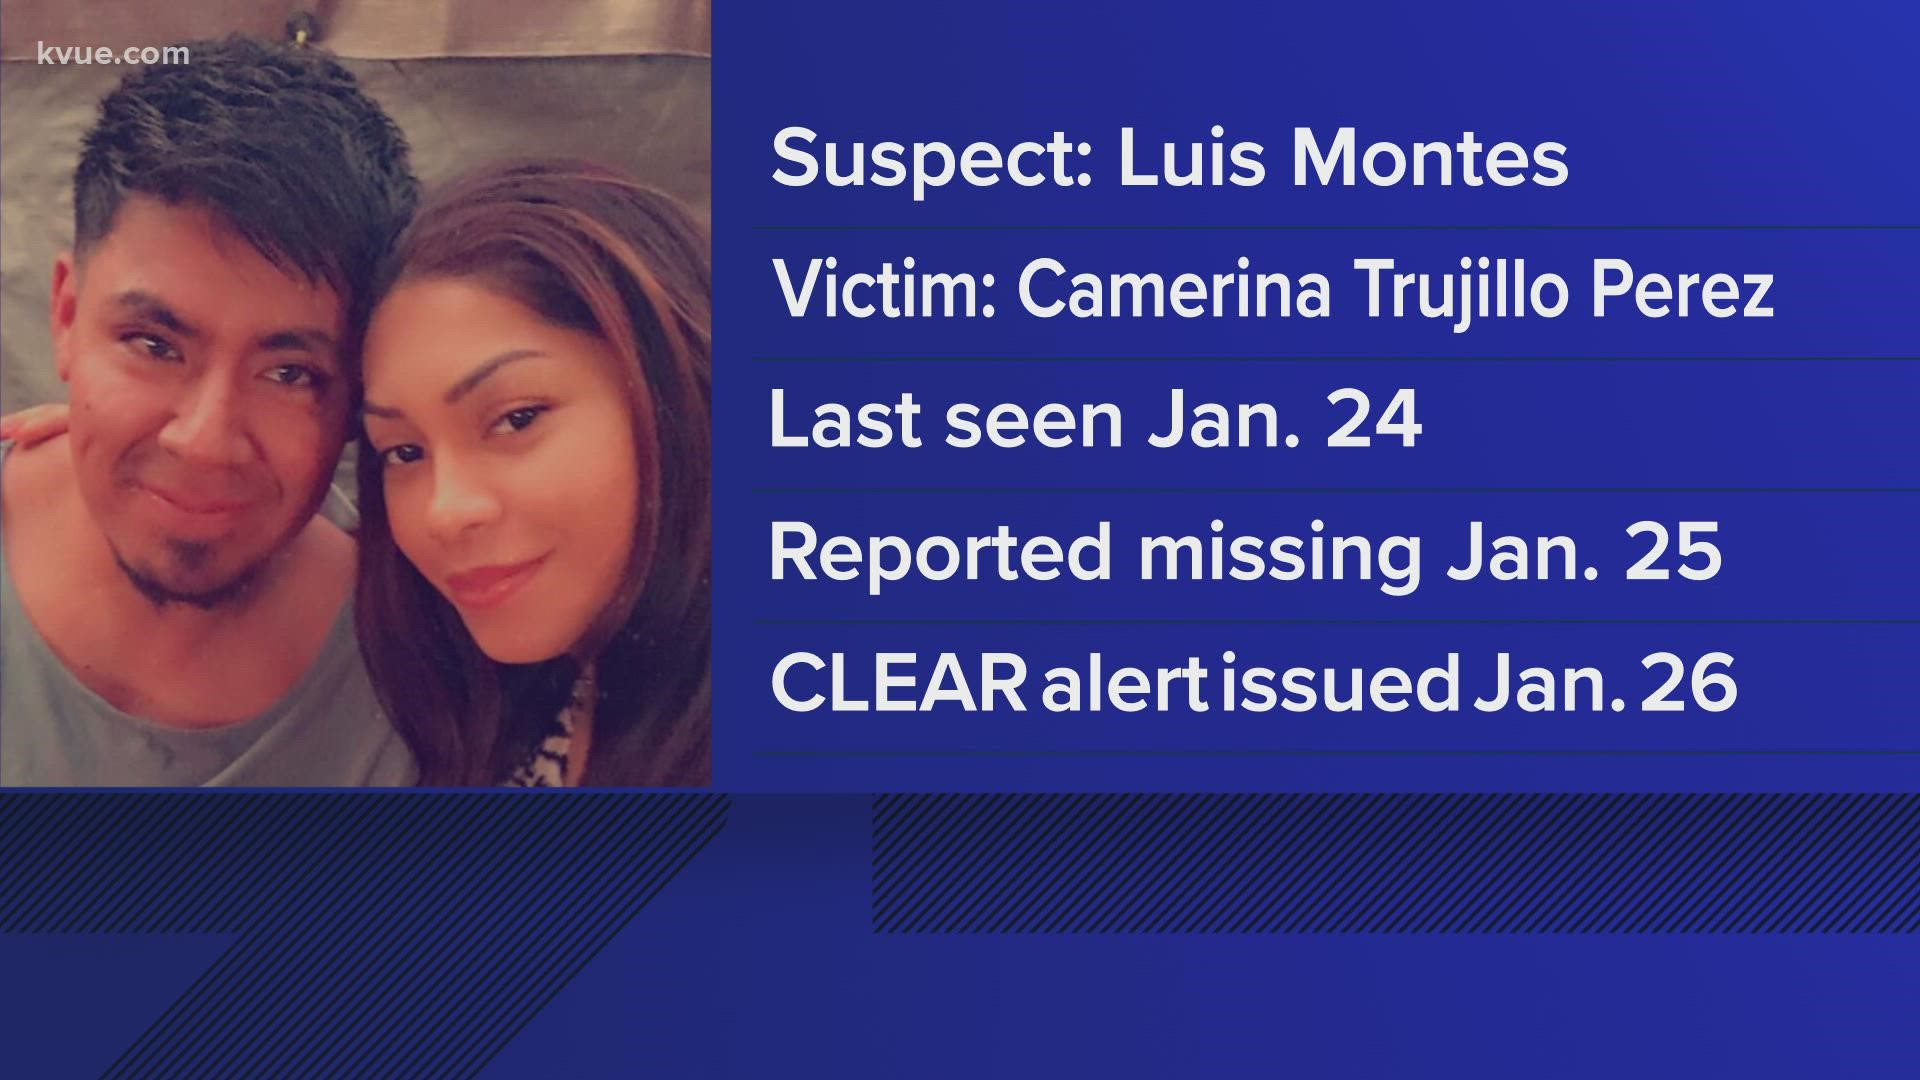 The Travis County Sheriff's Office is still searching for Luis Angel Montes.